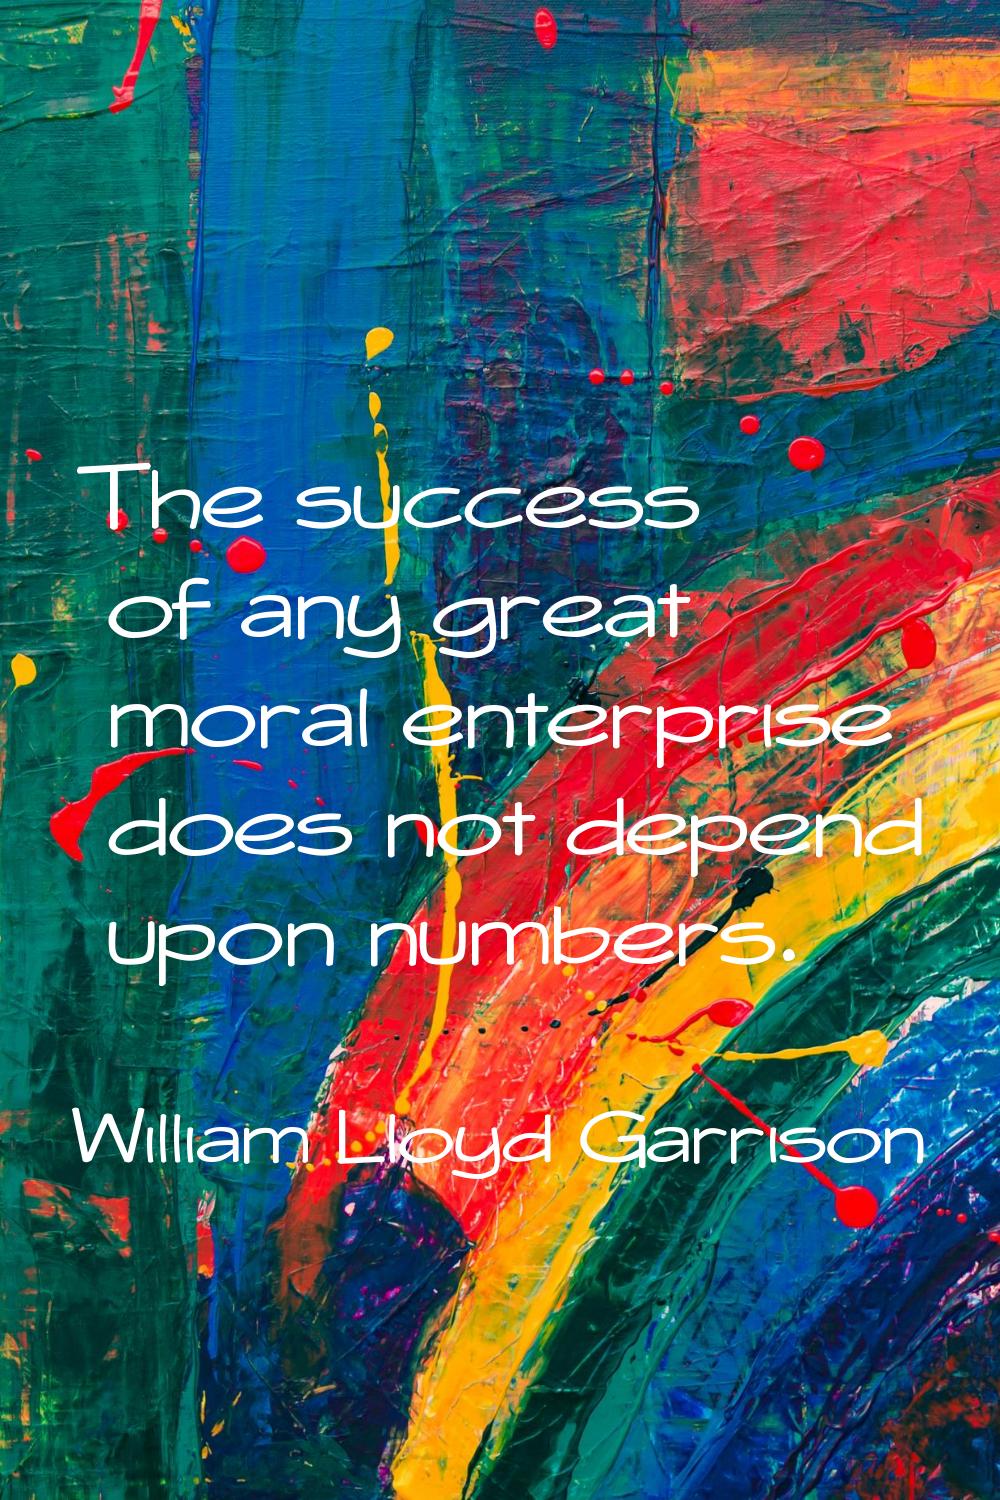 The success of any great moral enterprise does not depend upon numbers.